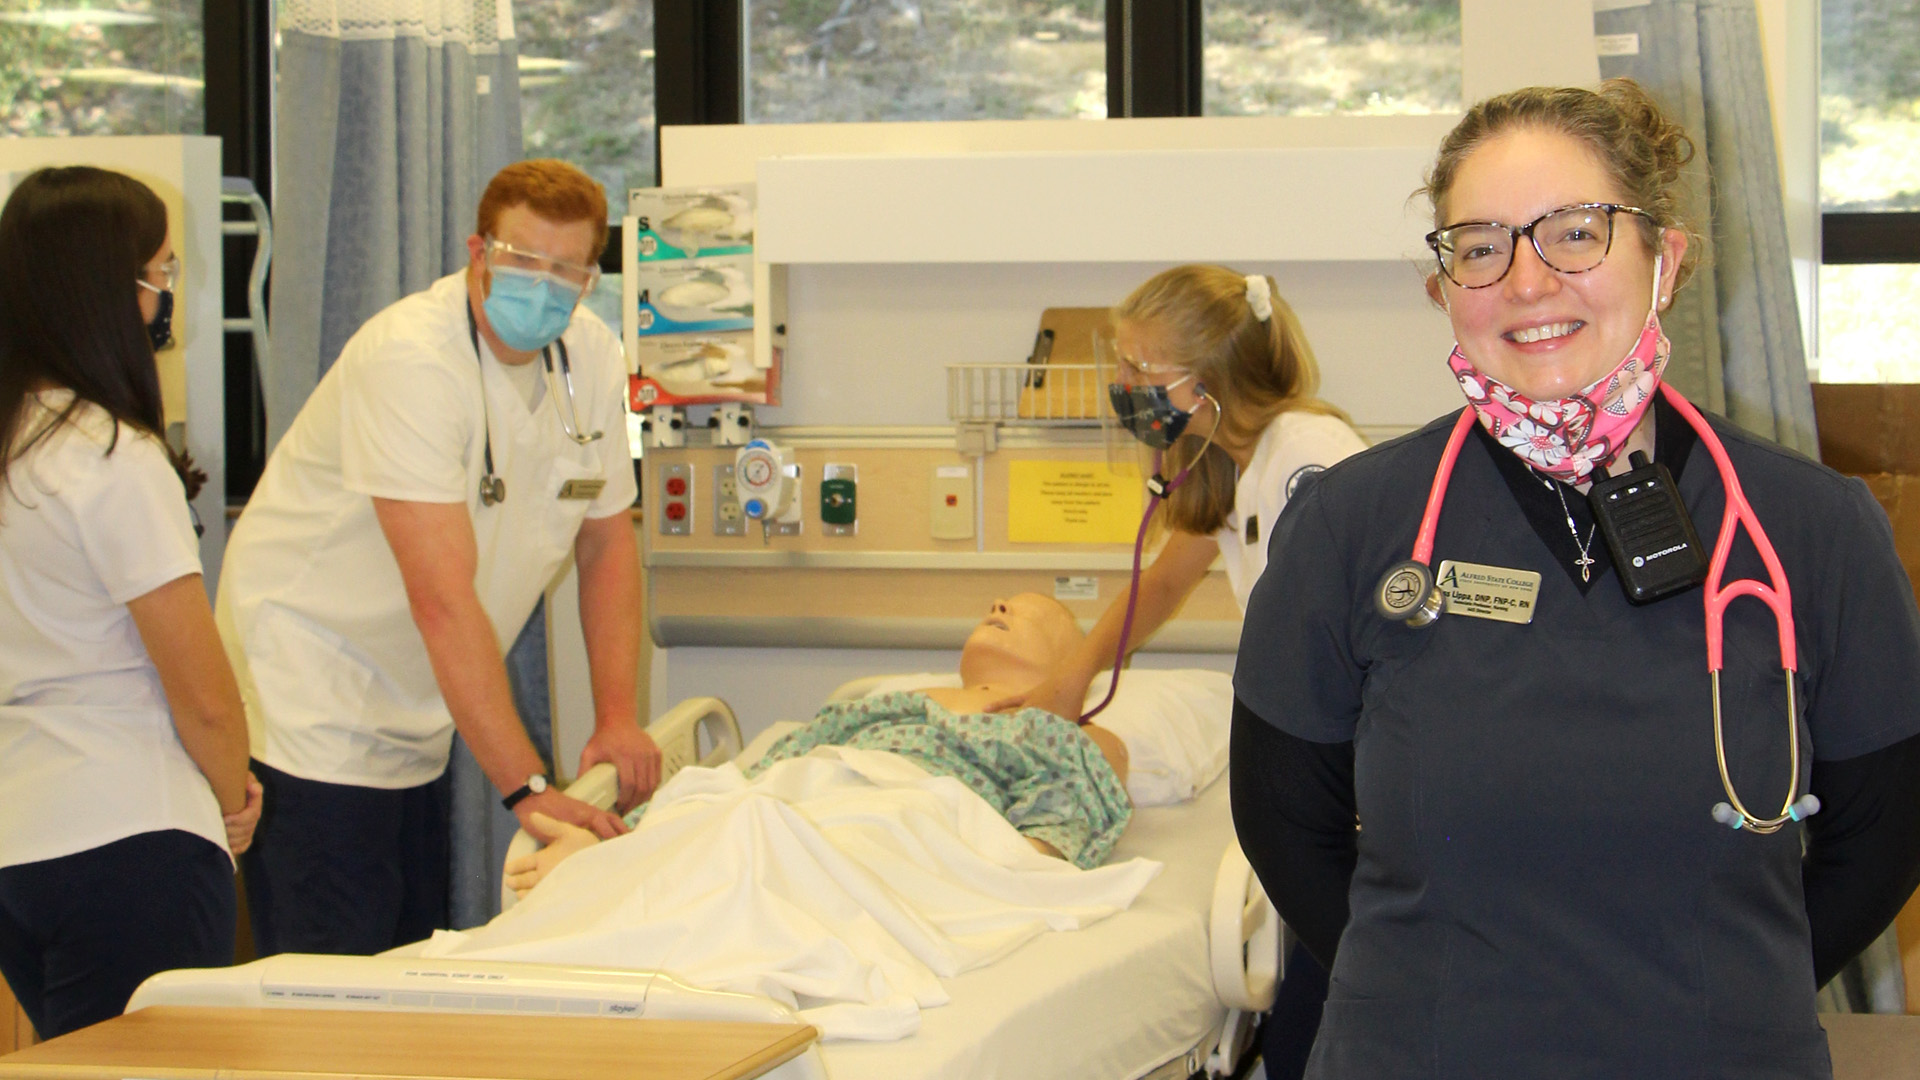 Jess Lippa with nursing students in background